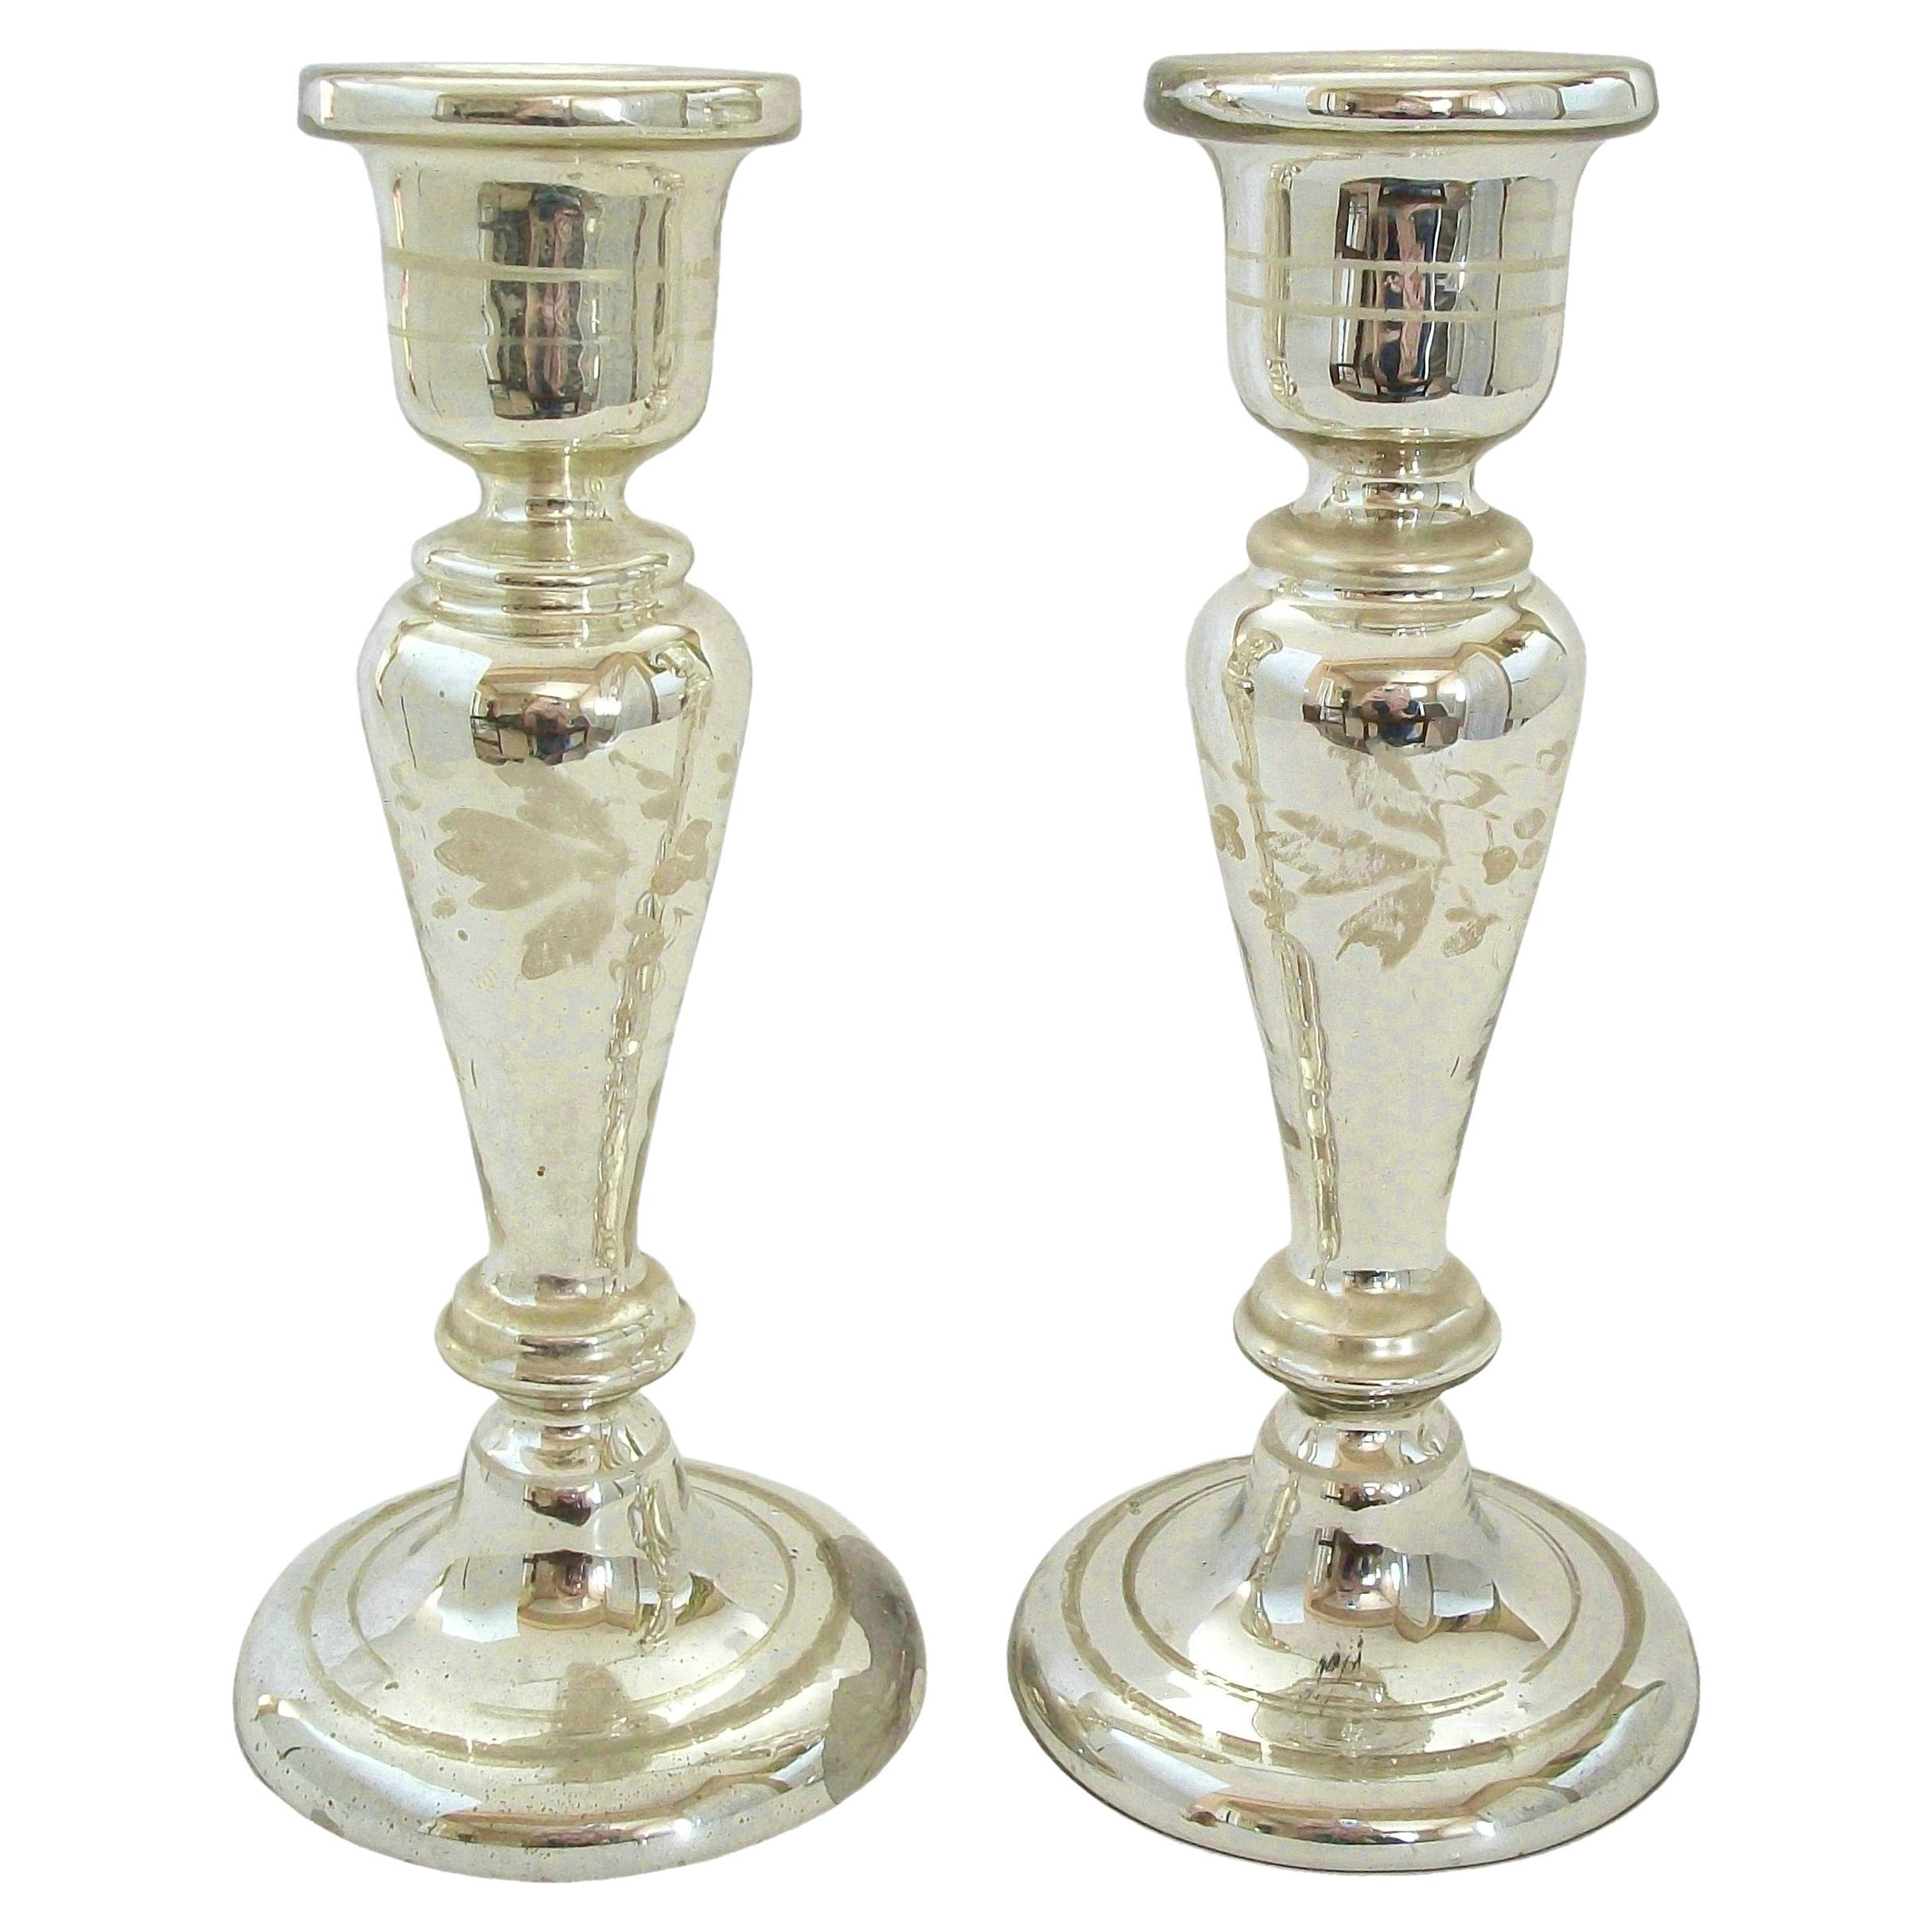 Antique Pair of White Painted Mercury Glass Candlesticks - France - Circa 1880 For Sale